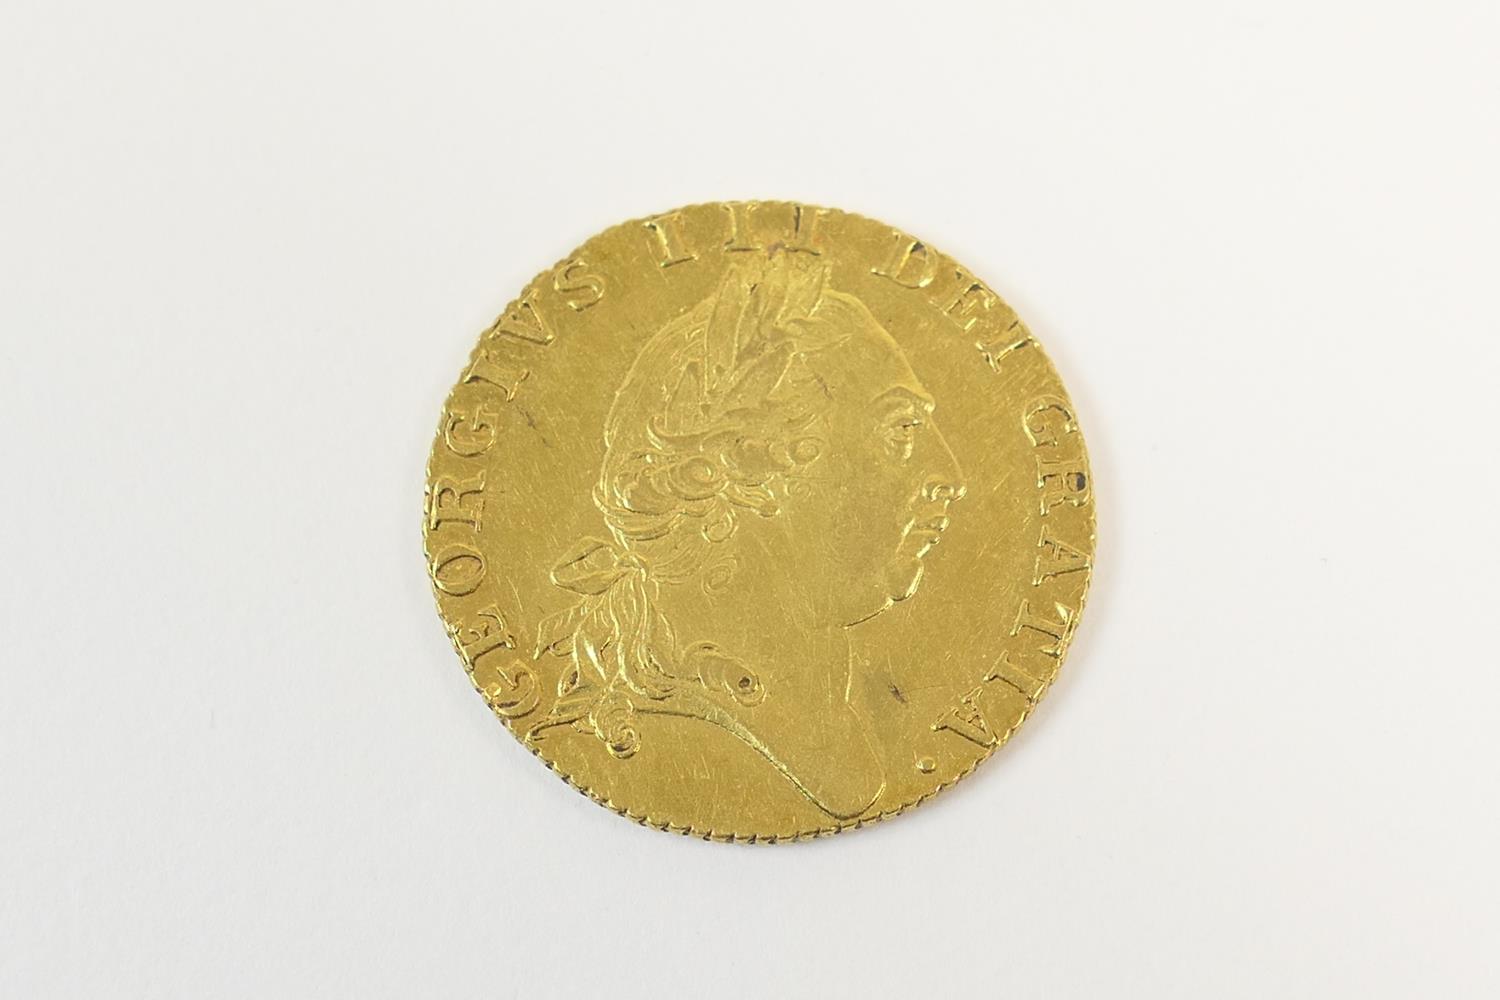 George III spade guinea, 1787 (EF), weight approx. 8.5g (Viewing is by appointment only during